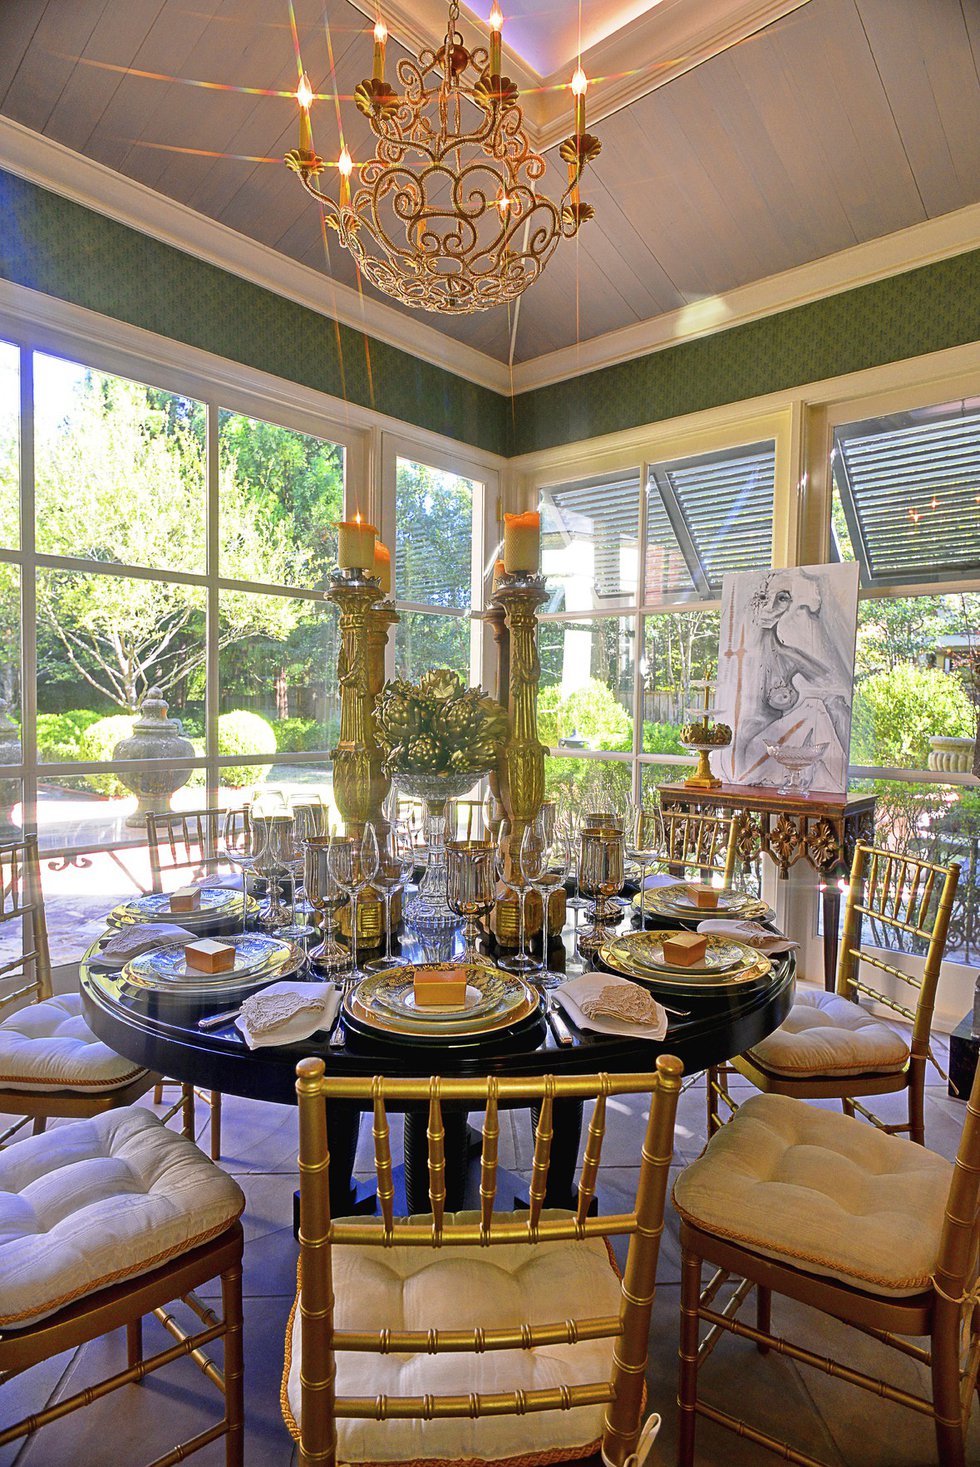 The sunroom with its round table, gold chairs, and glorious views of the formal gardens is the perfect setting for a small, elegant family breakfast.
